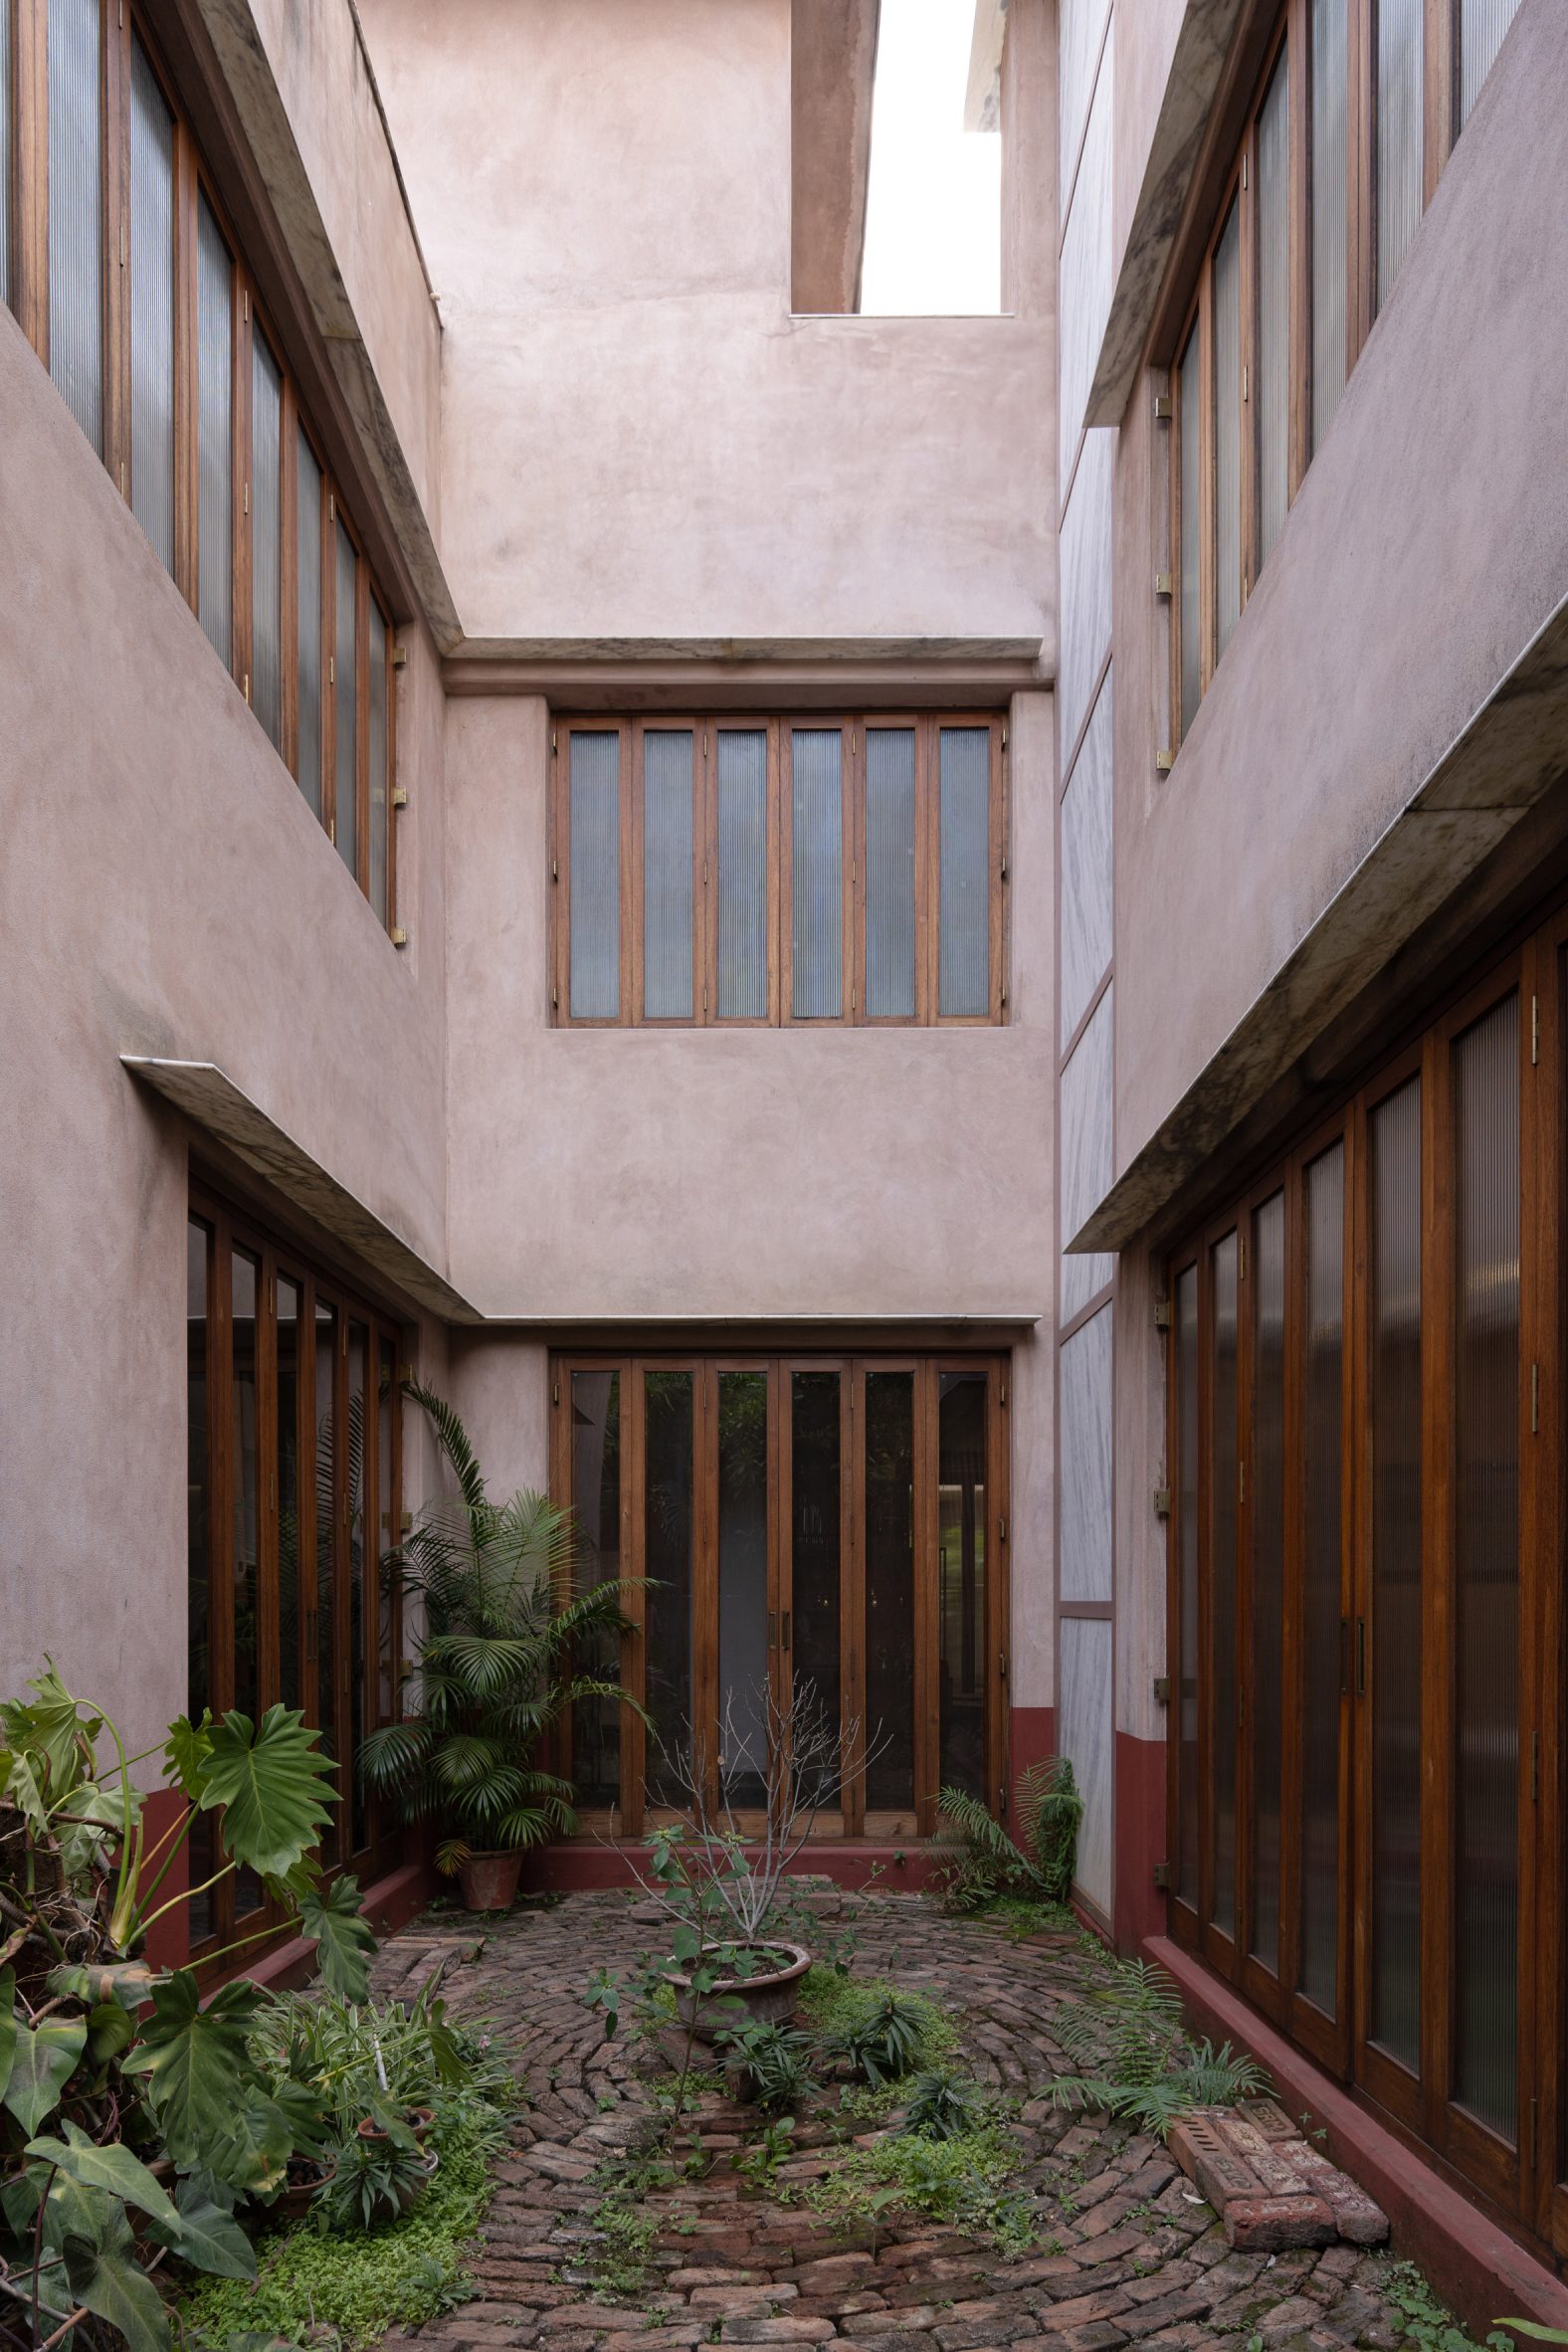 Courtyard of Mayalogili house by Nowhere in Hyderabad